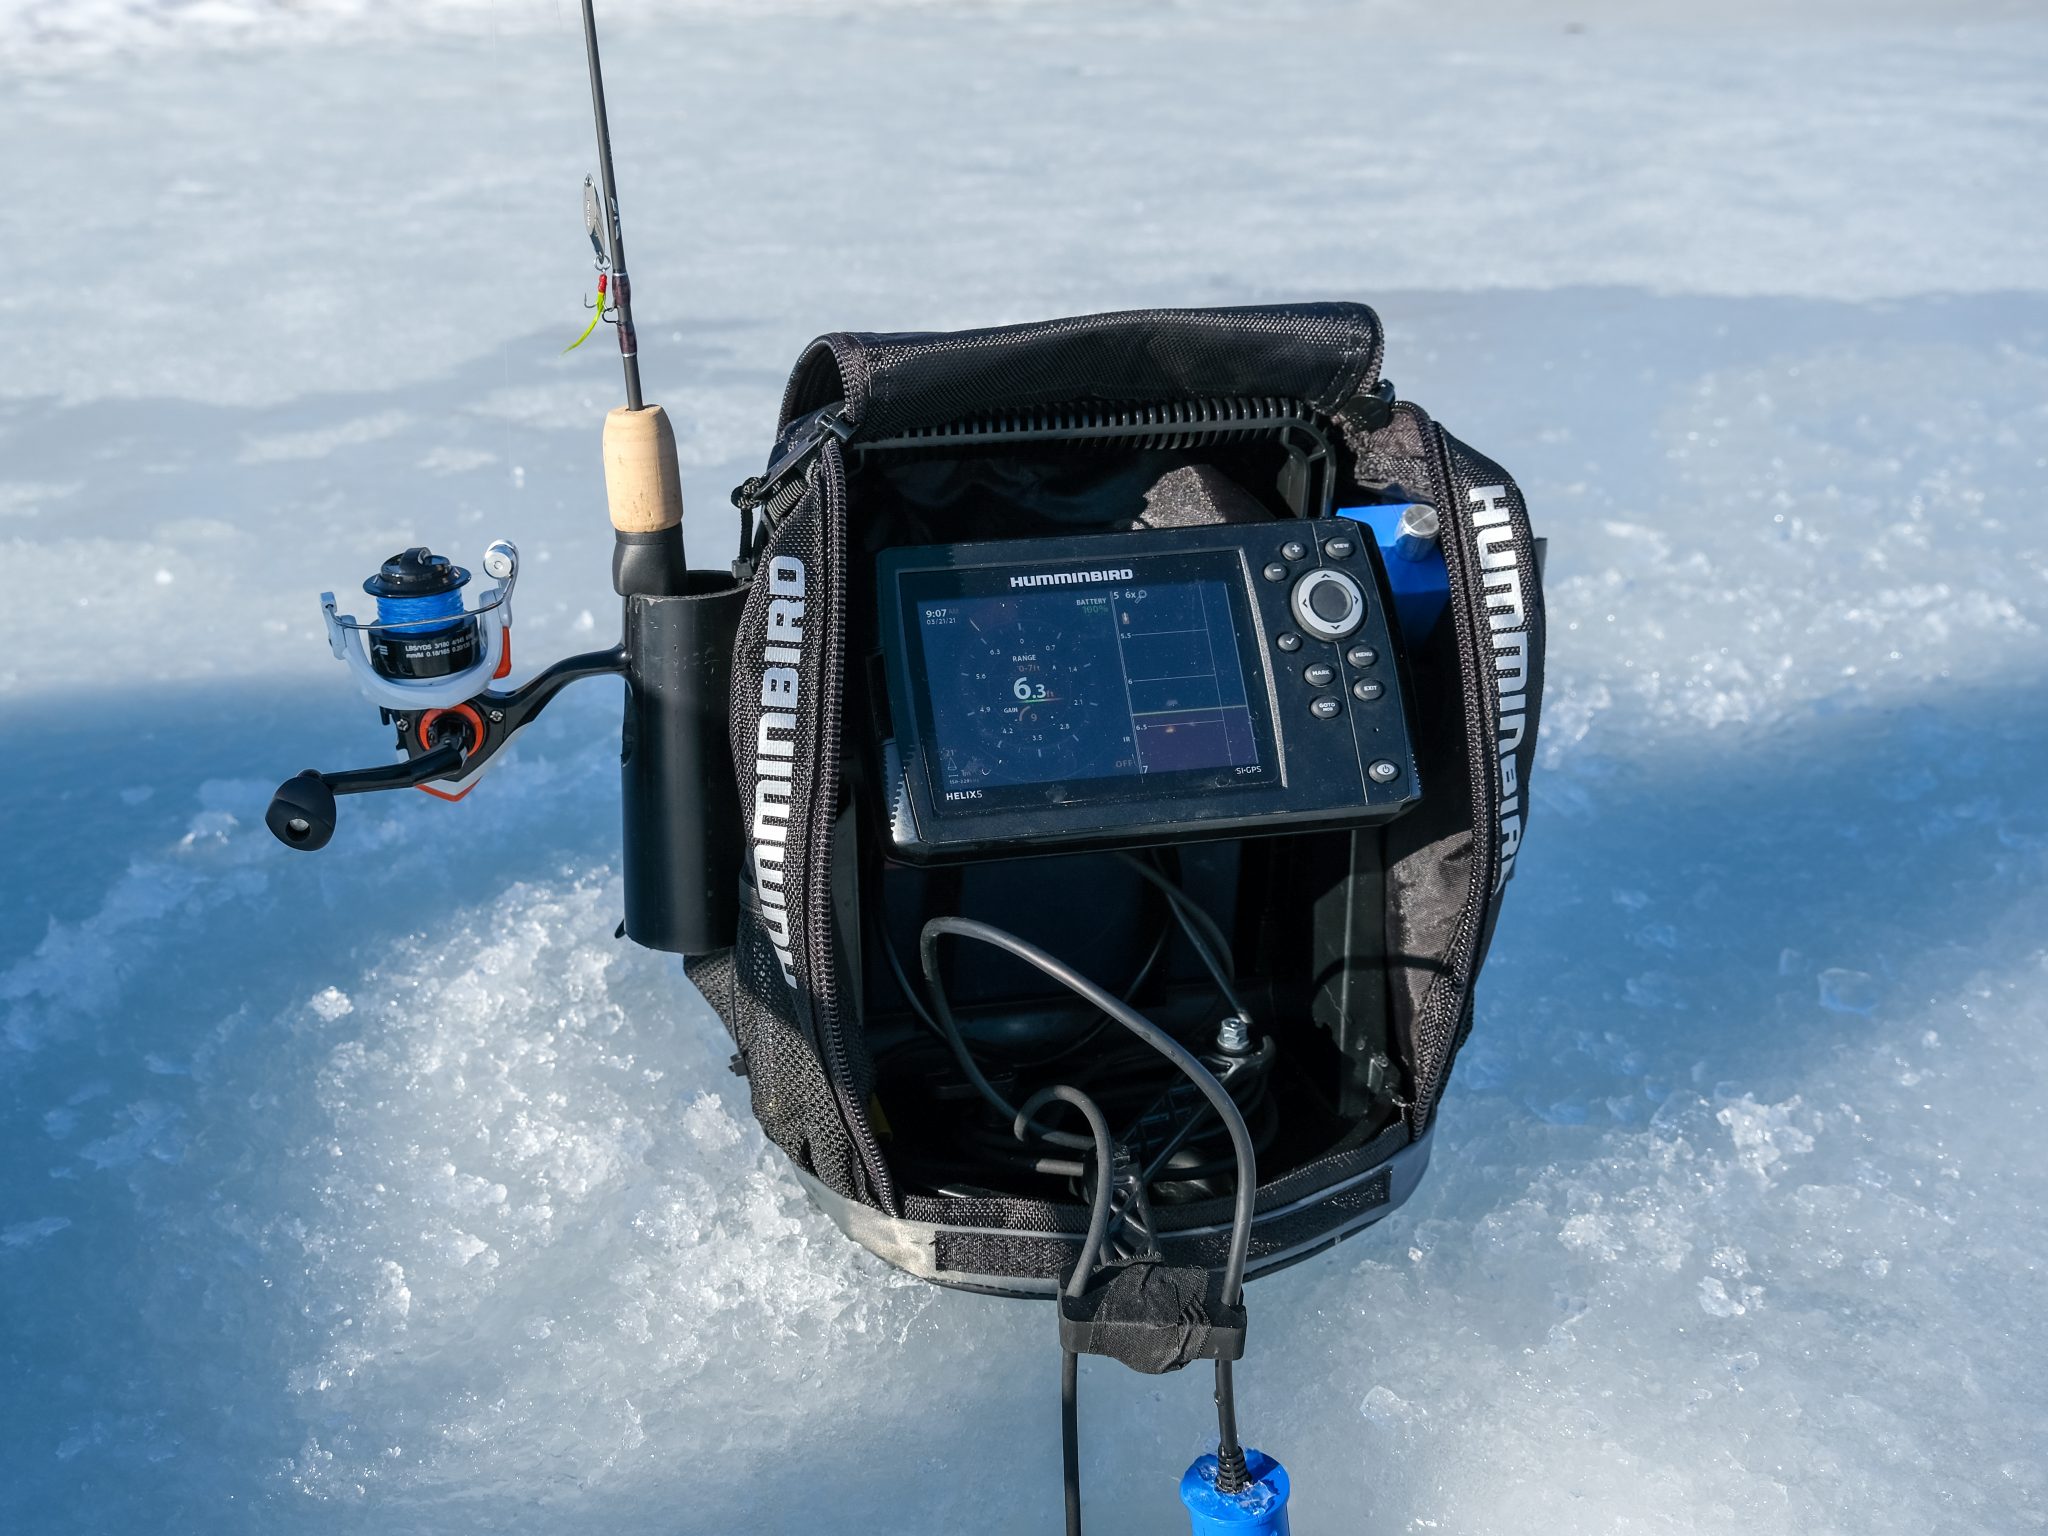 Humminbird Ice Helix 5 - The Ultimate Review - String Theory Angling